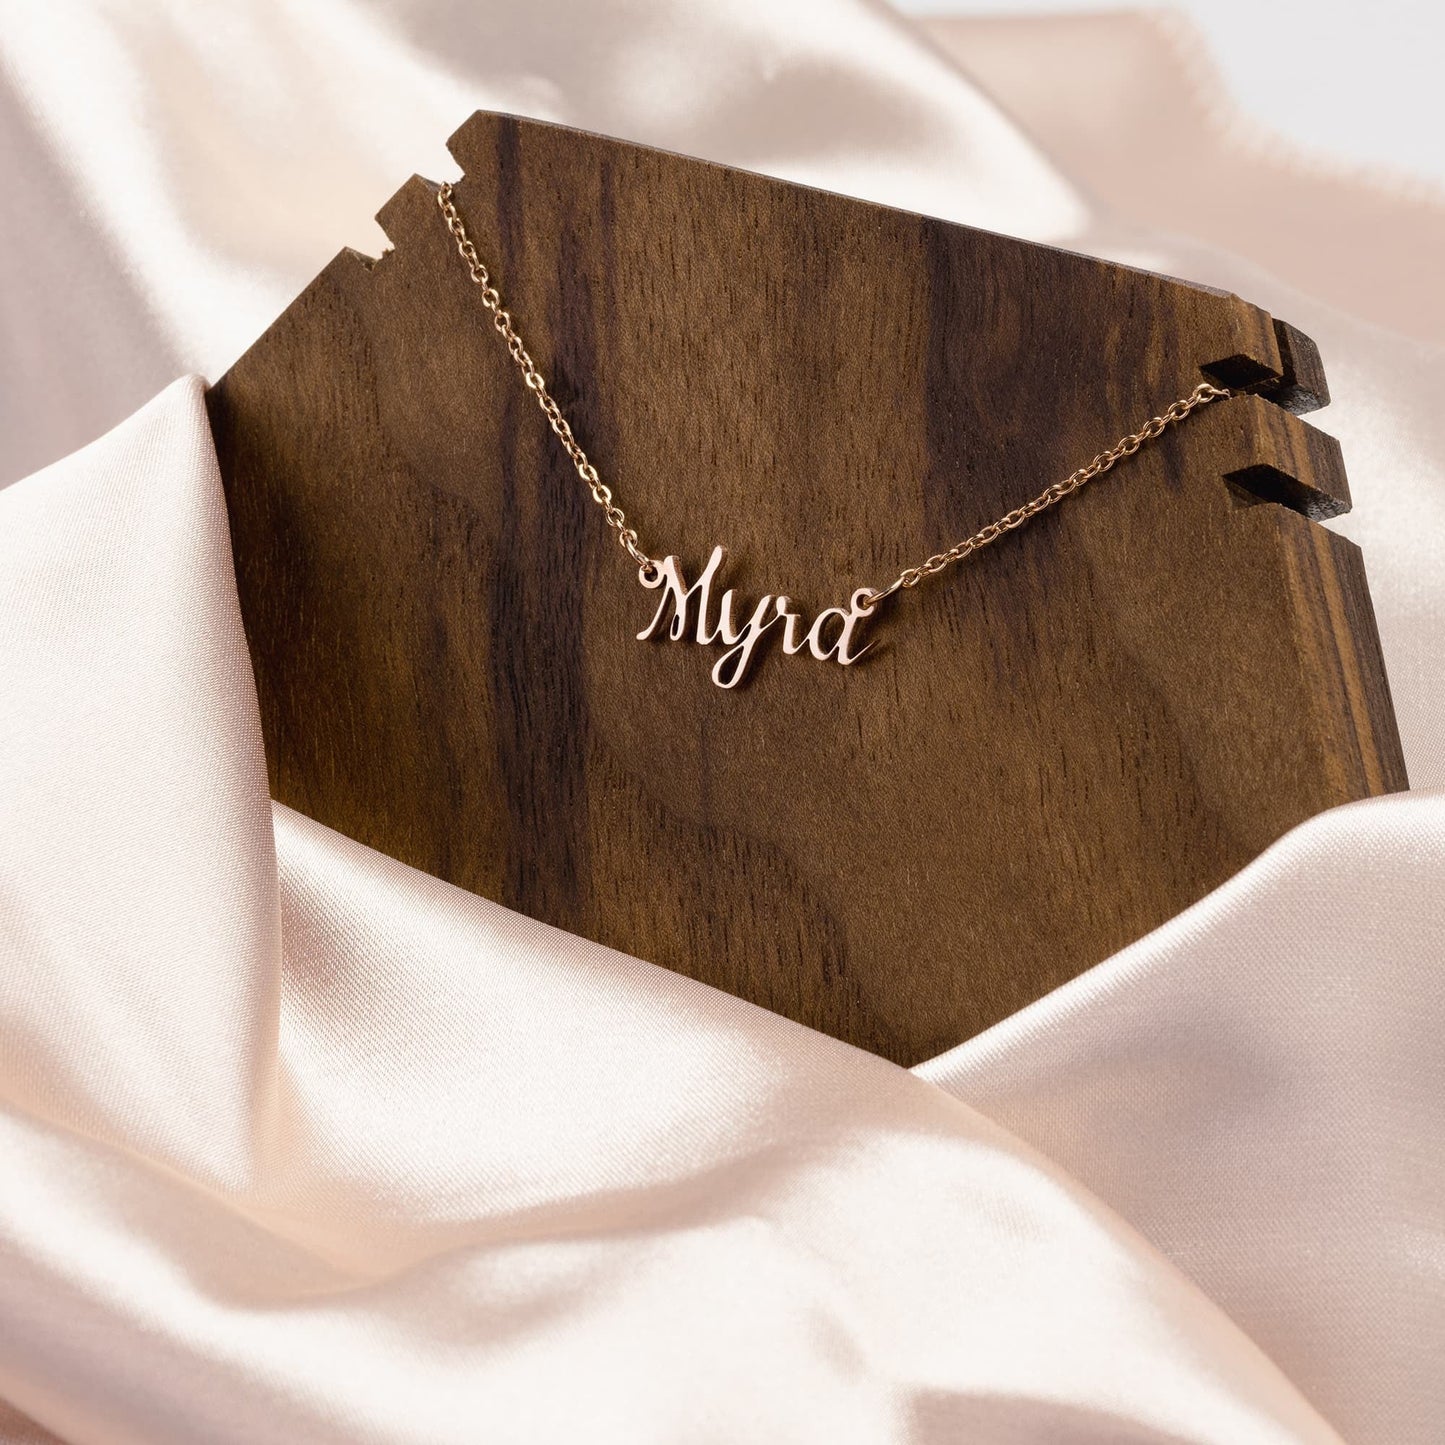 Personalized neck for that lovely lady - The muggin shop